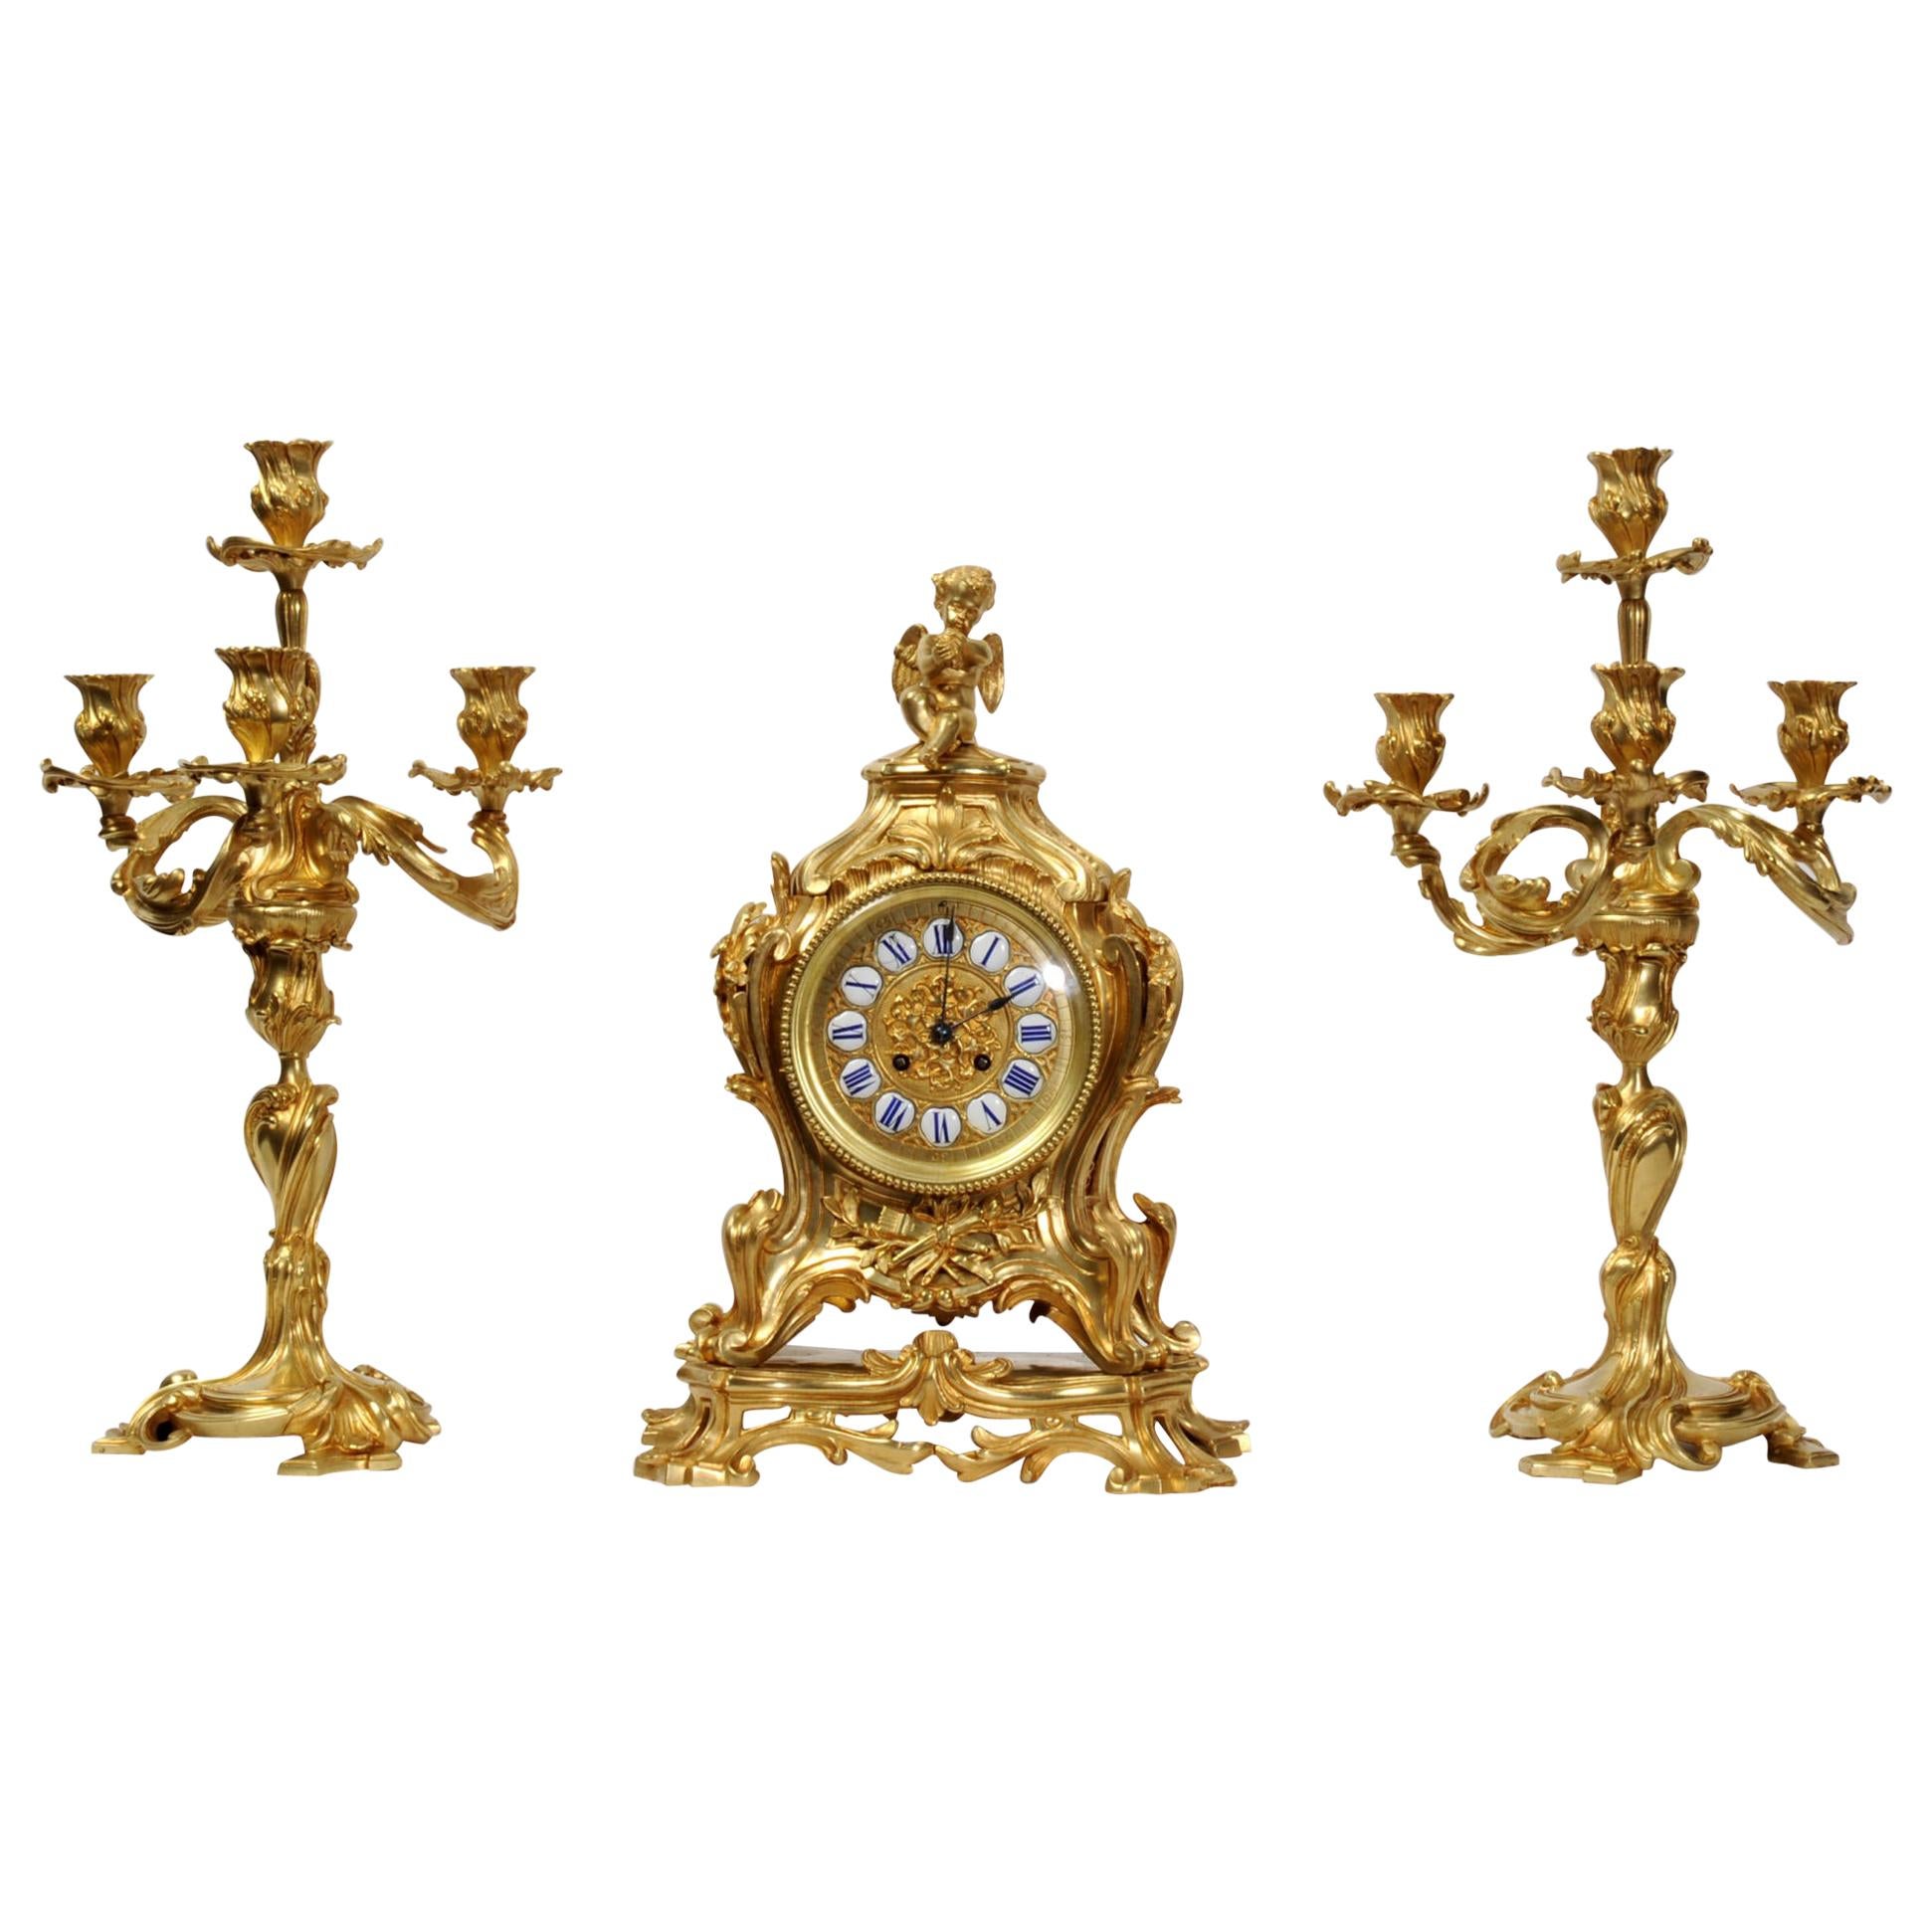 Magnificent Antique French Rococo Clock Set After Meissonnier